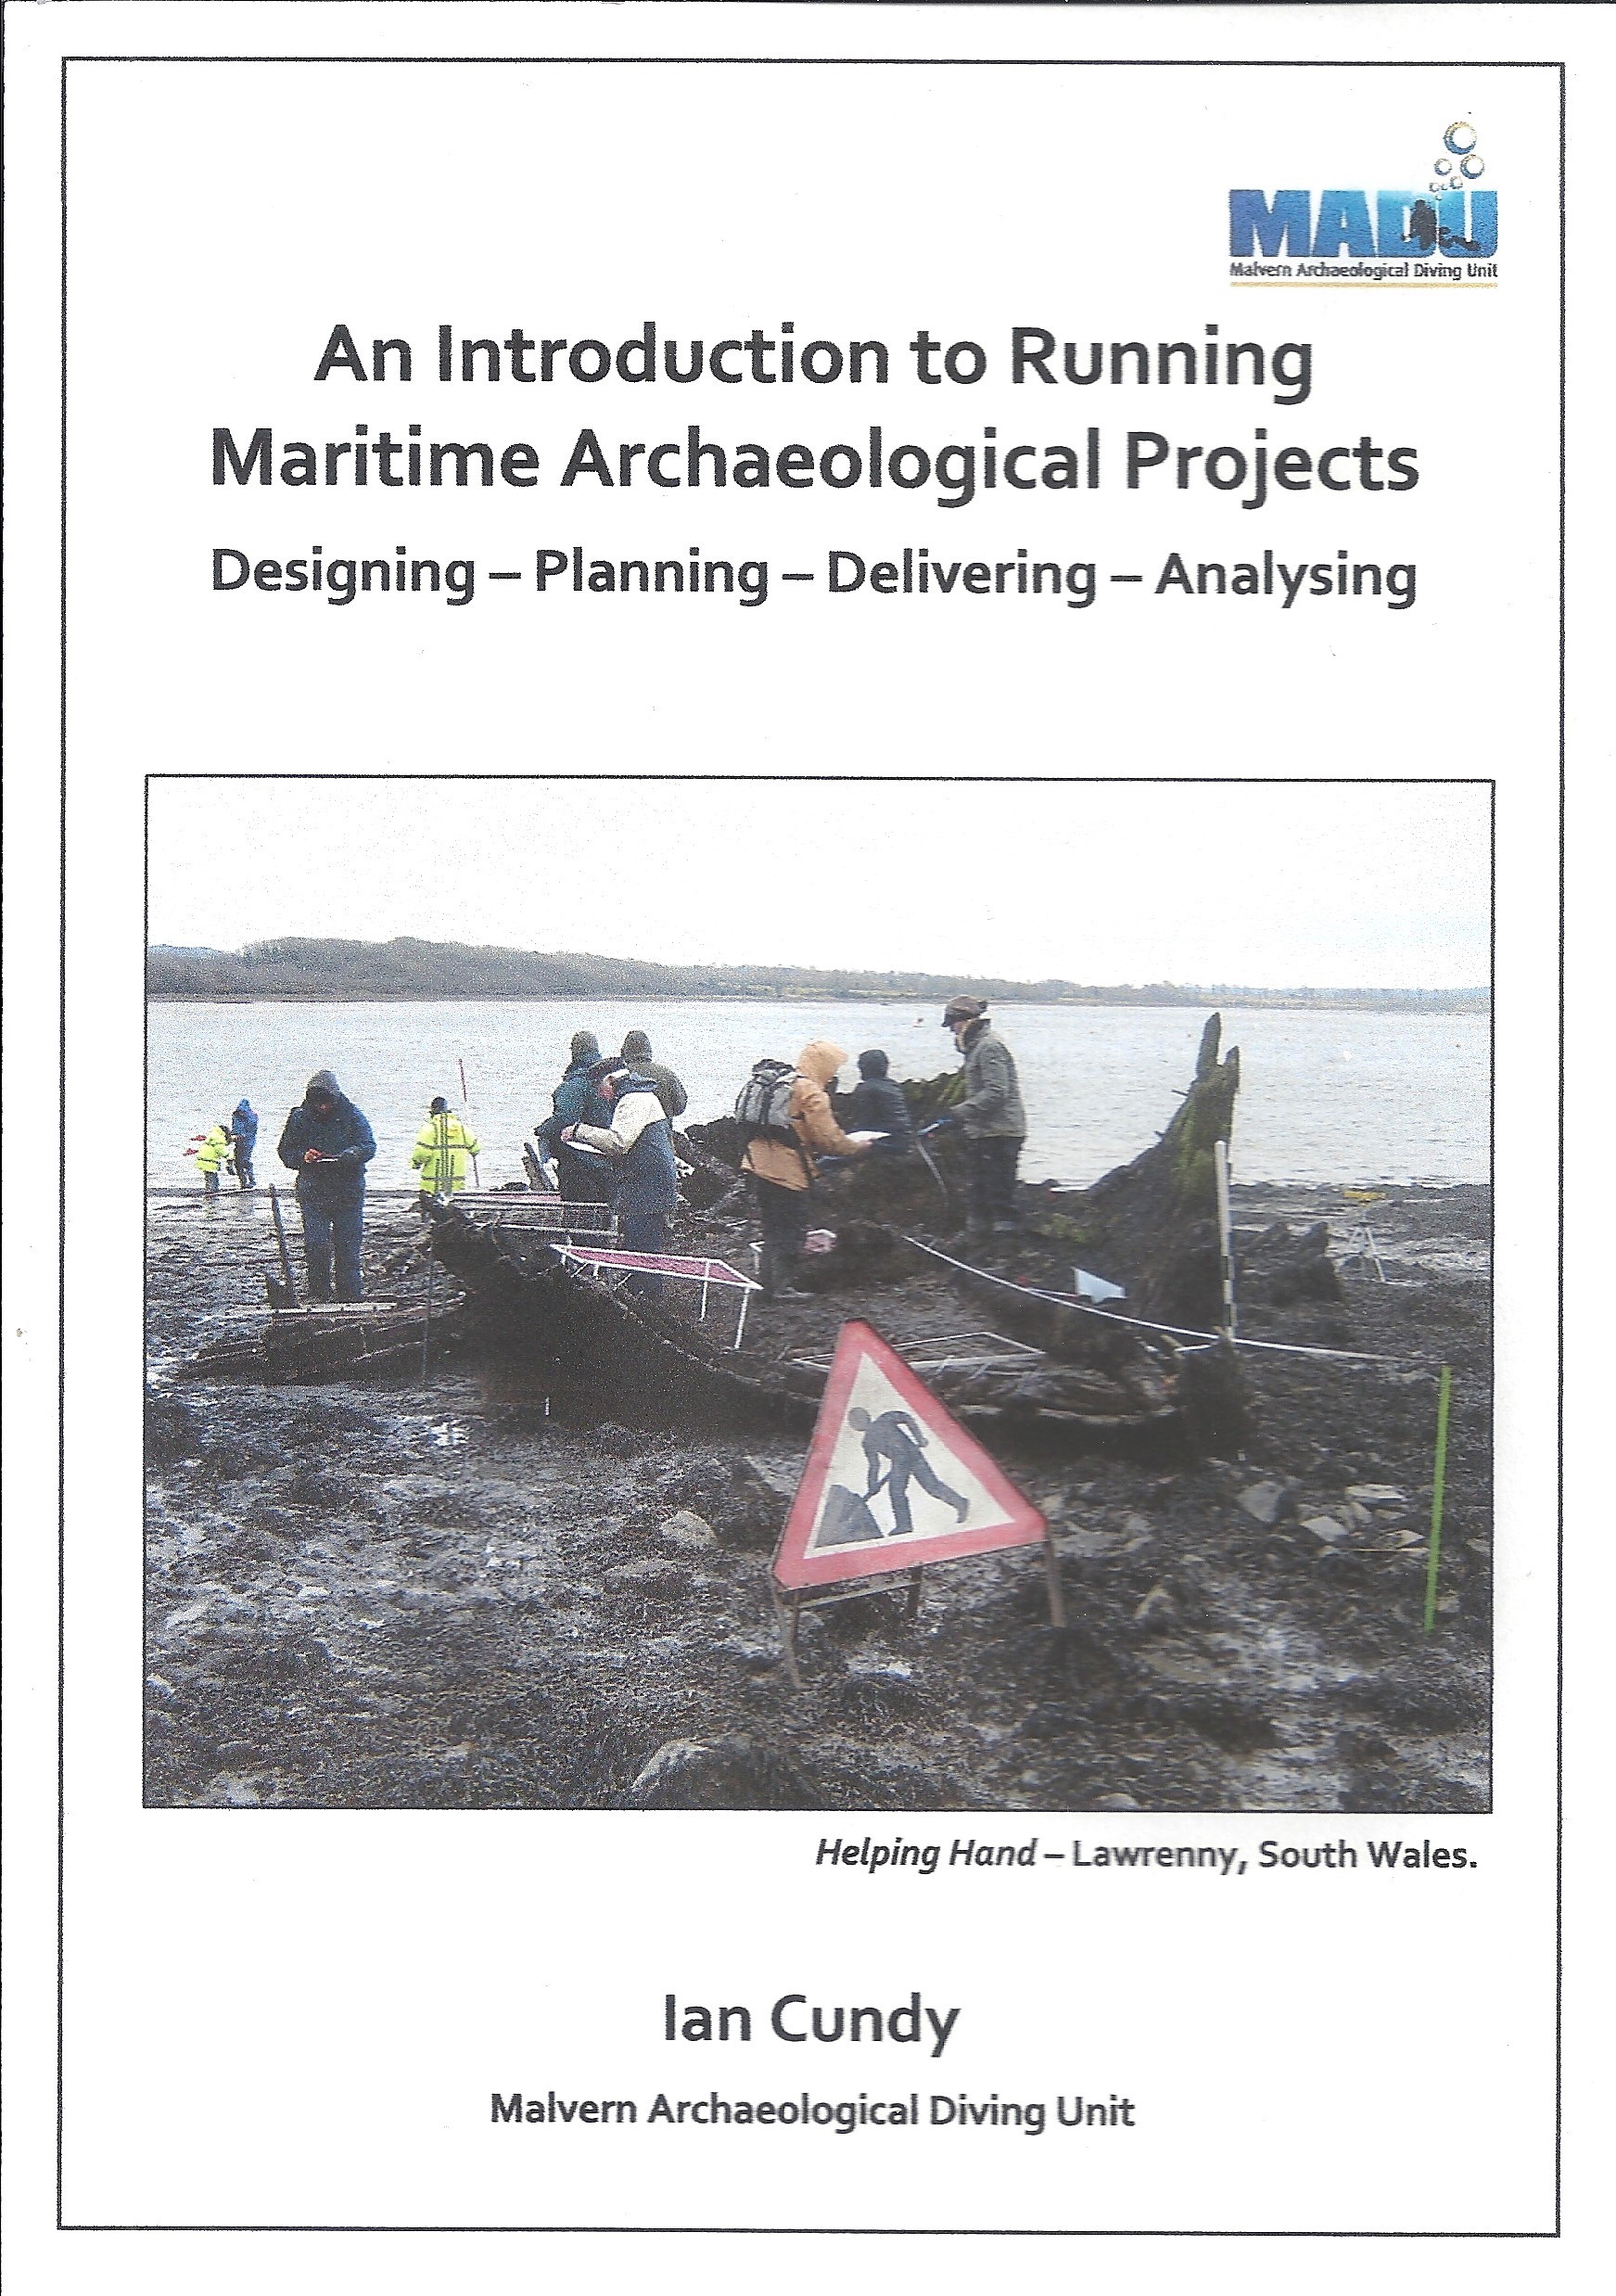 An Introduction to Running Maritime Archaeological Projects - Front Cover